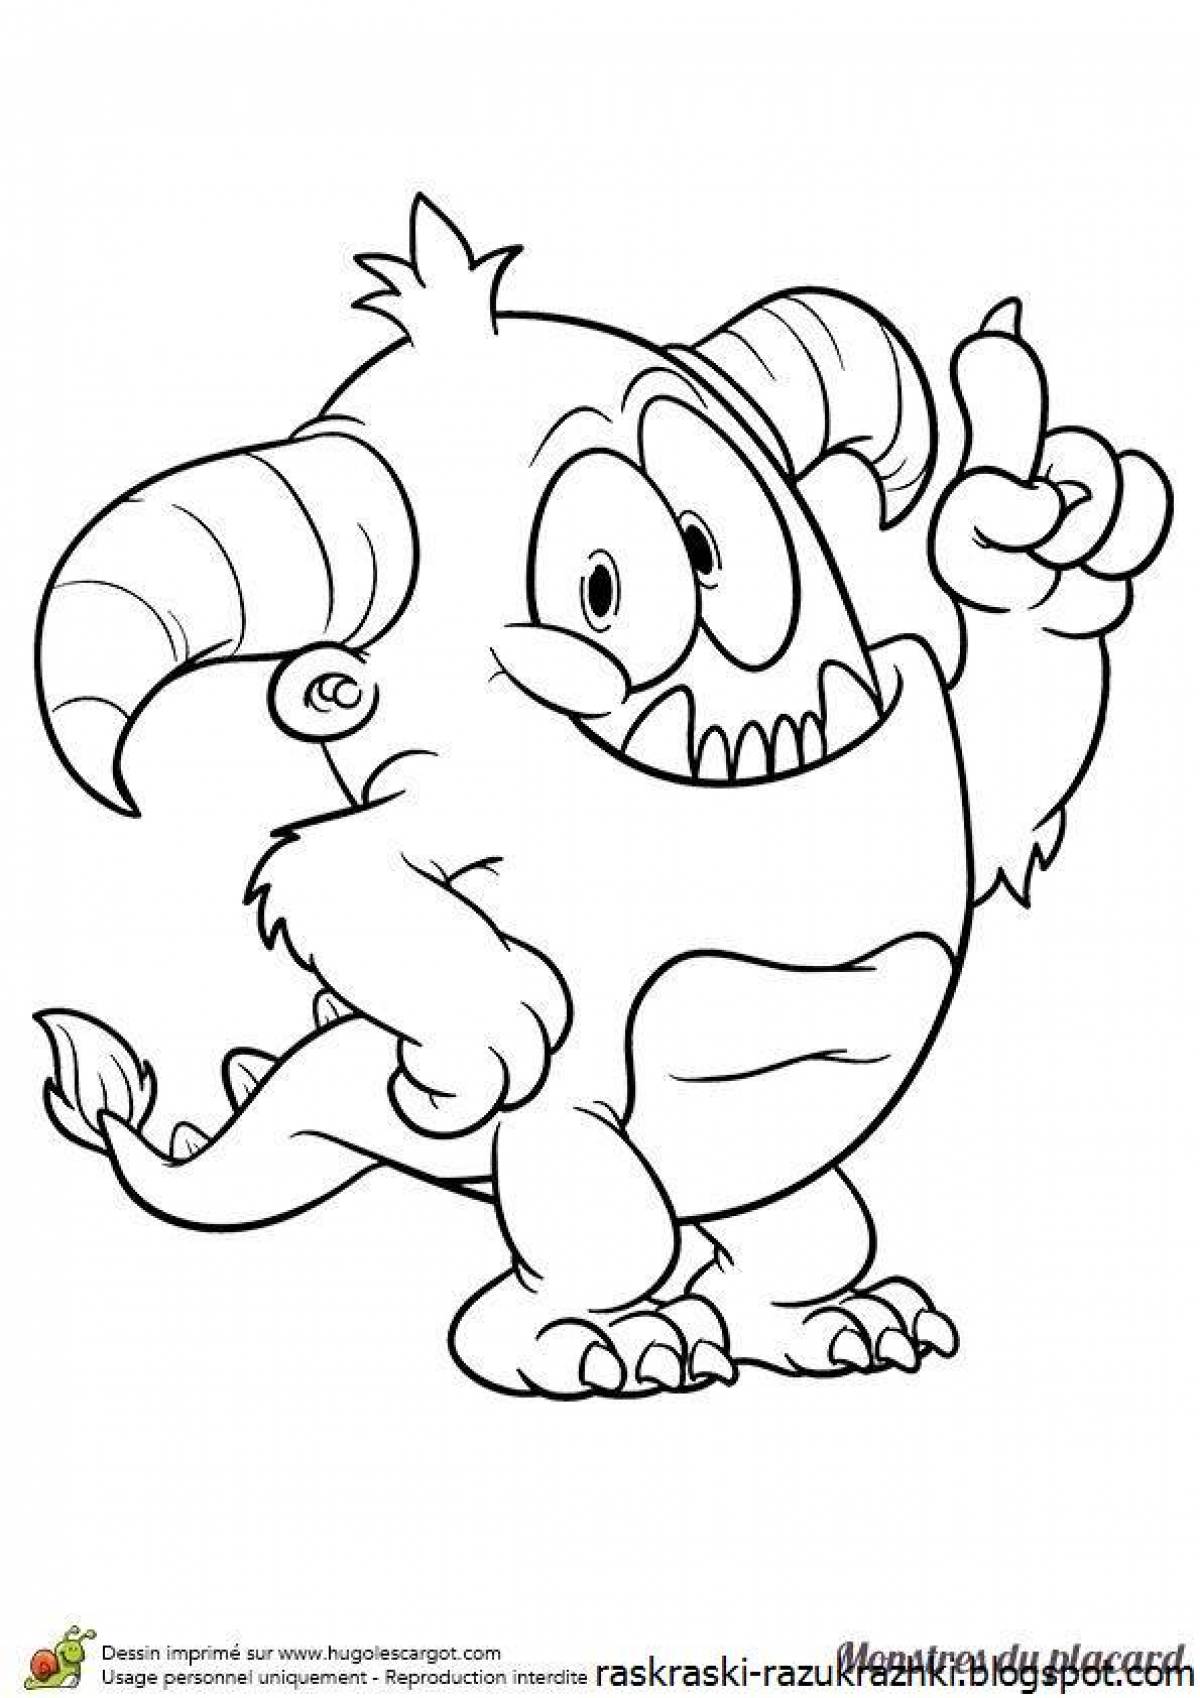 Menacing monster coloring pages